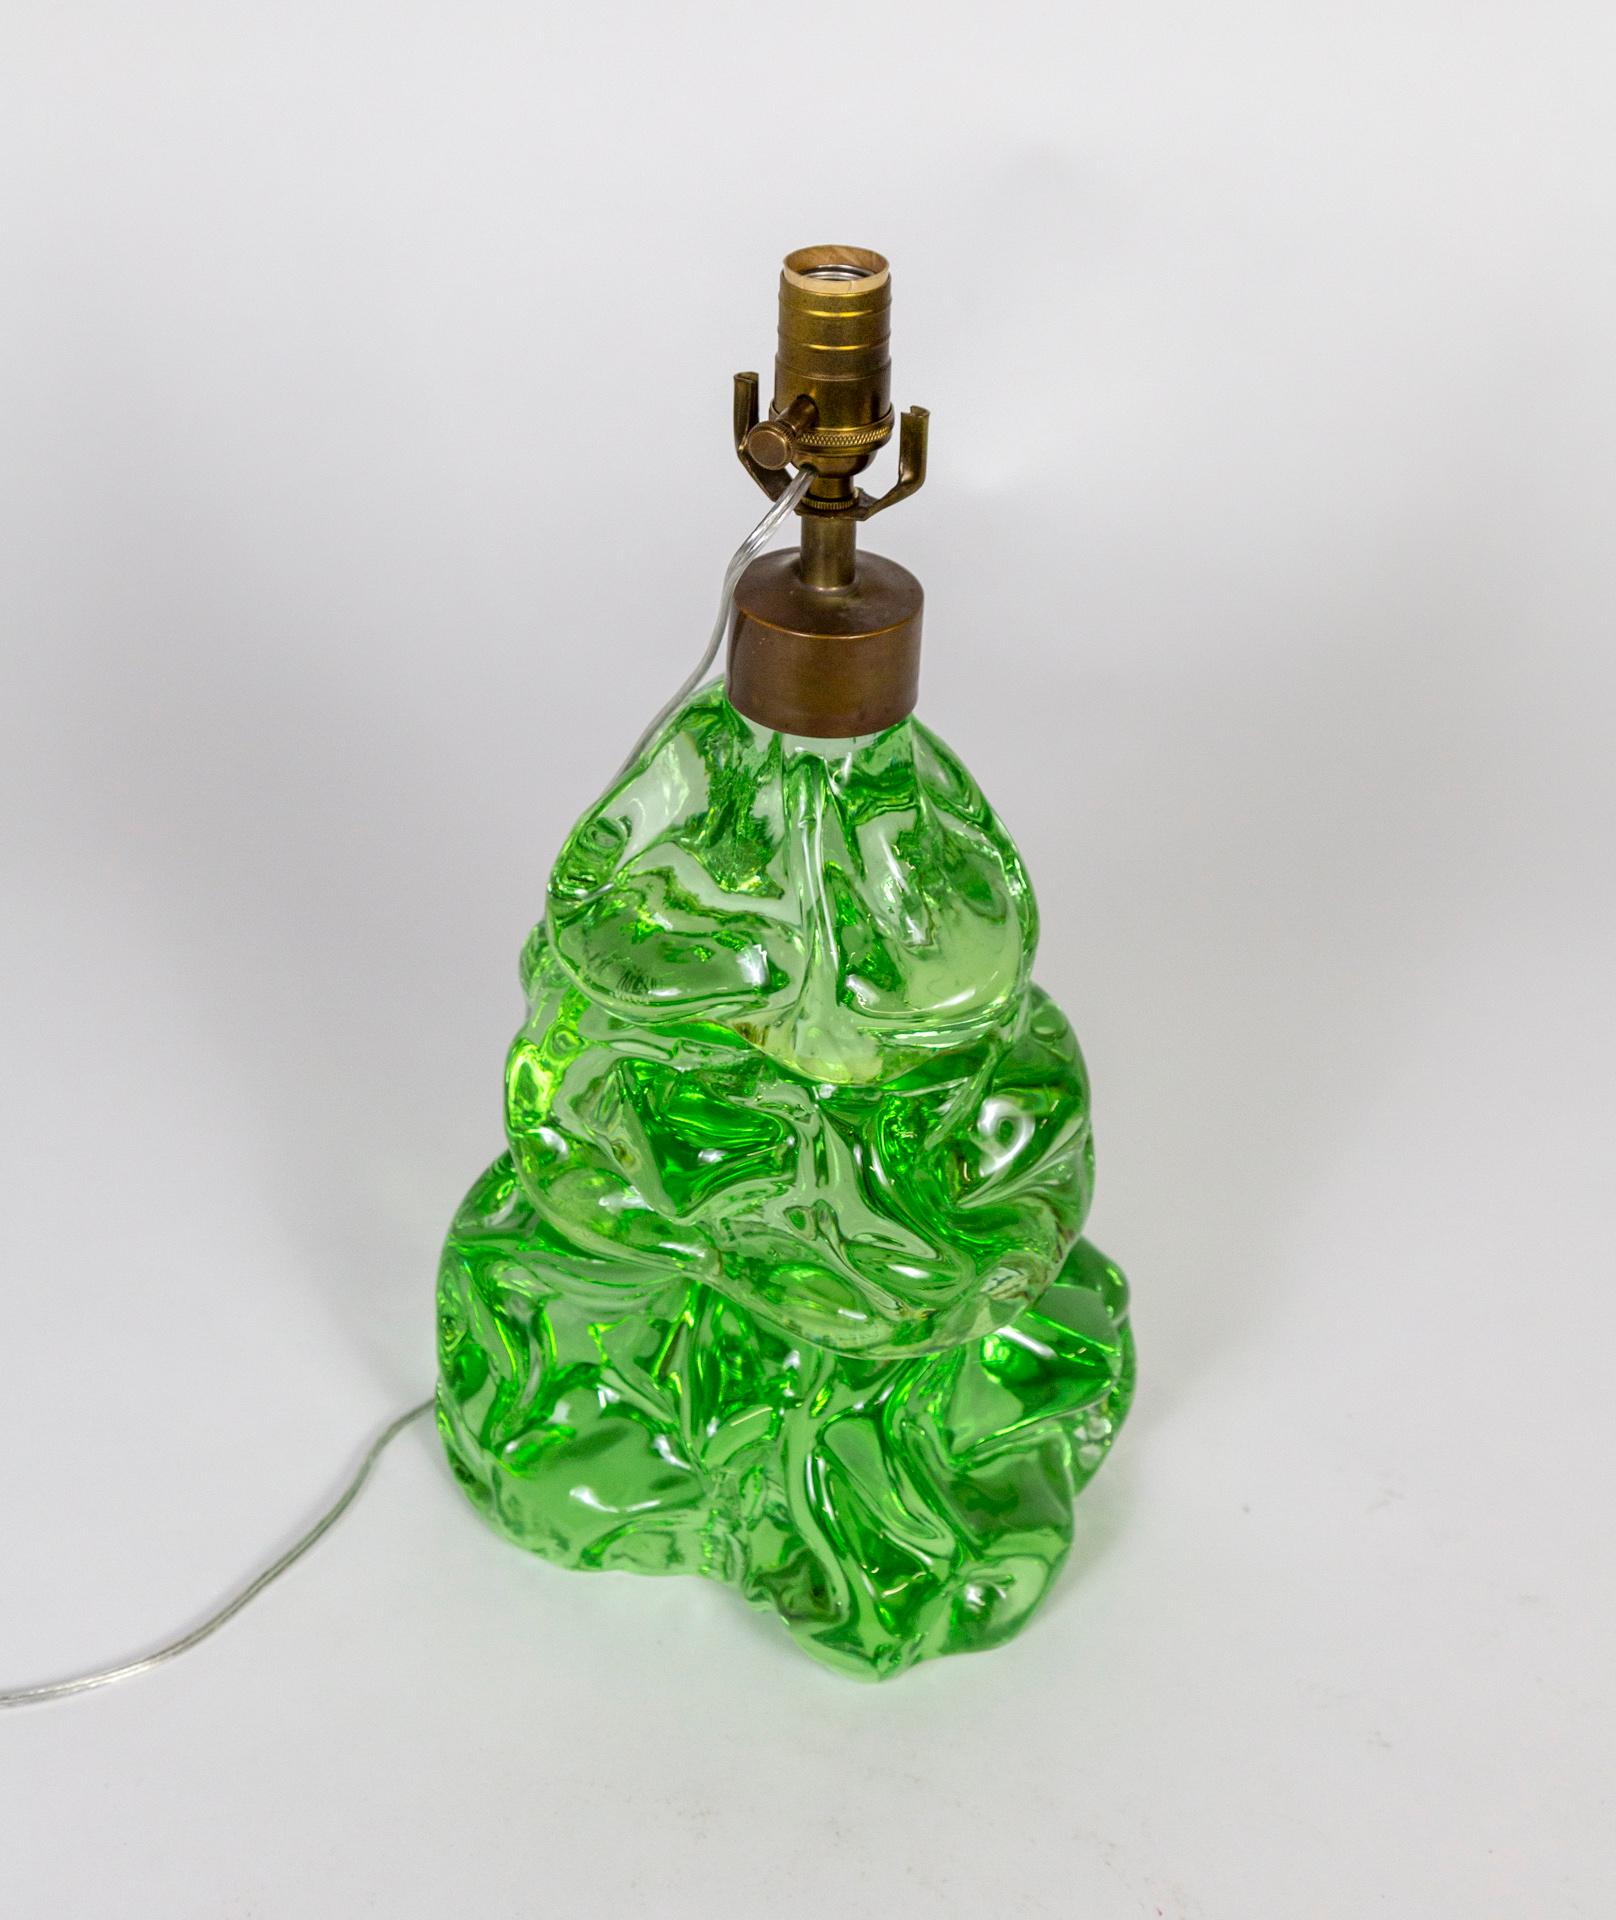 Transparent Green Glass Organic Form Lamp For Sale 2